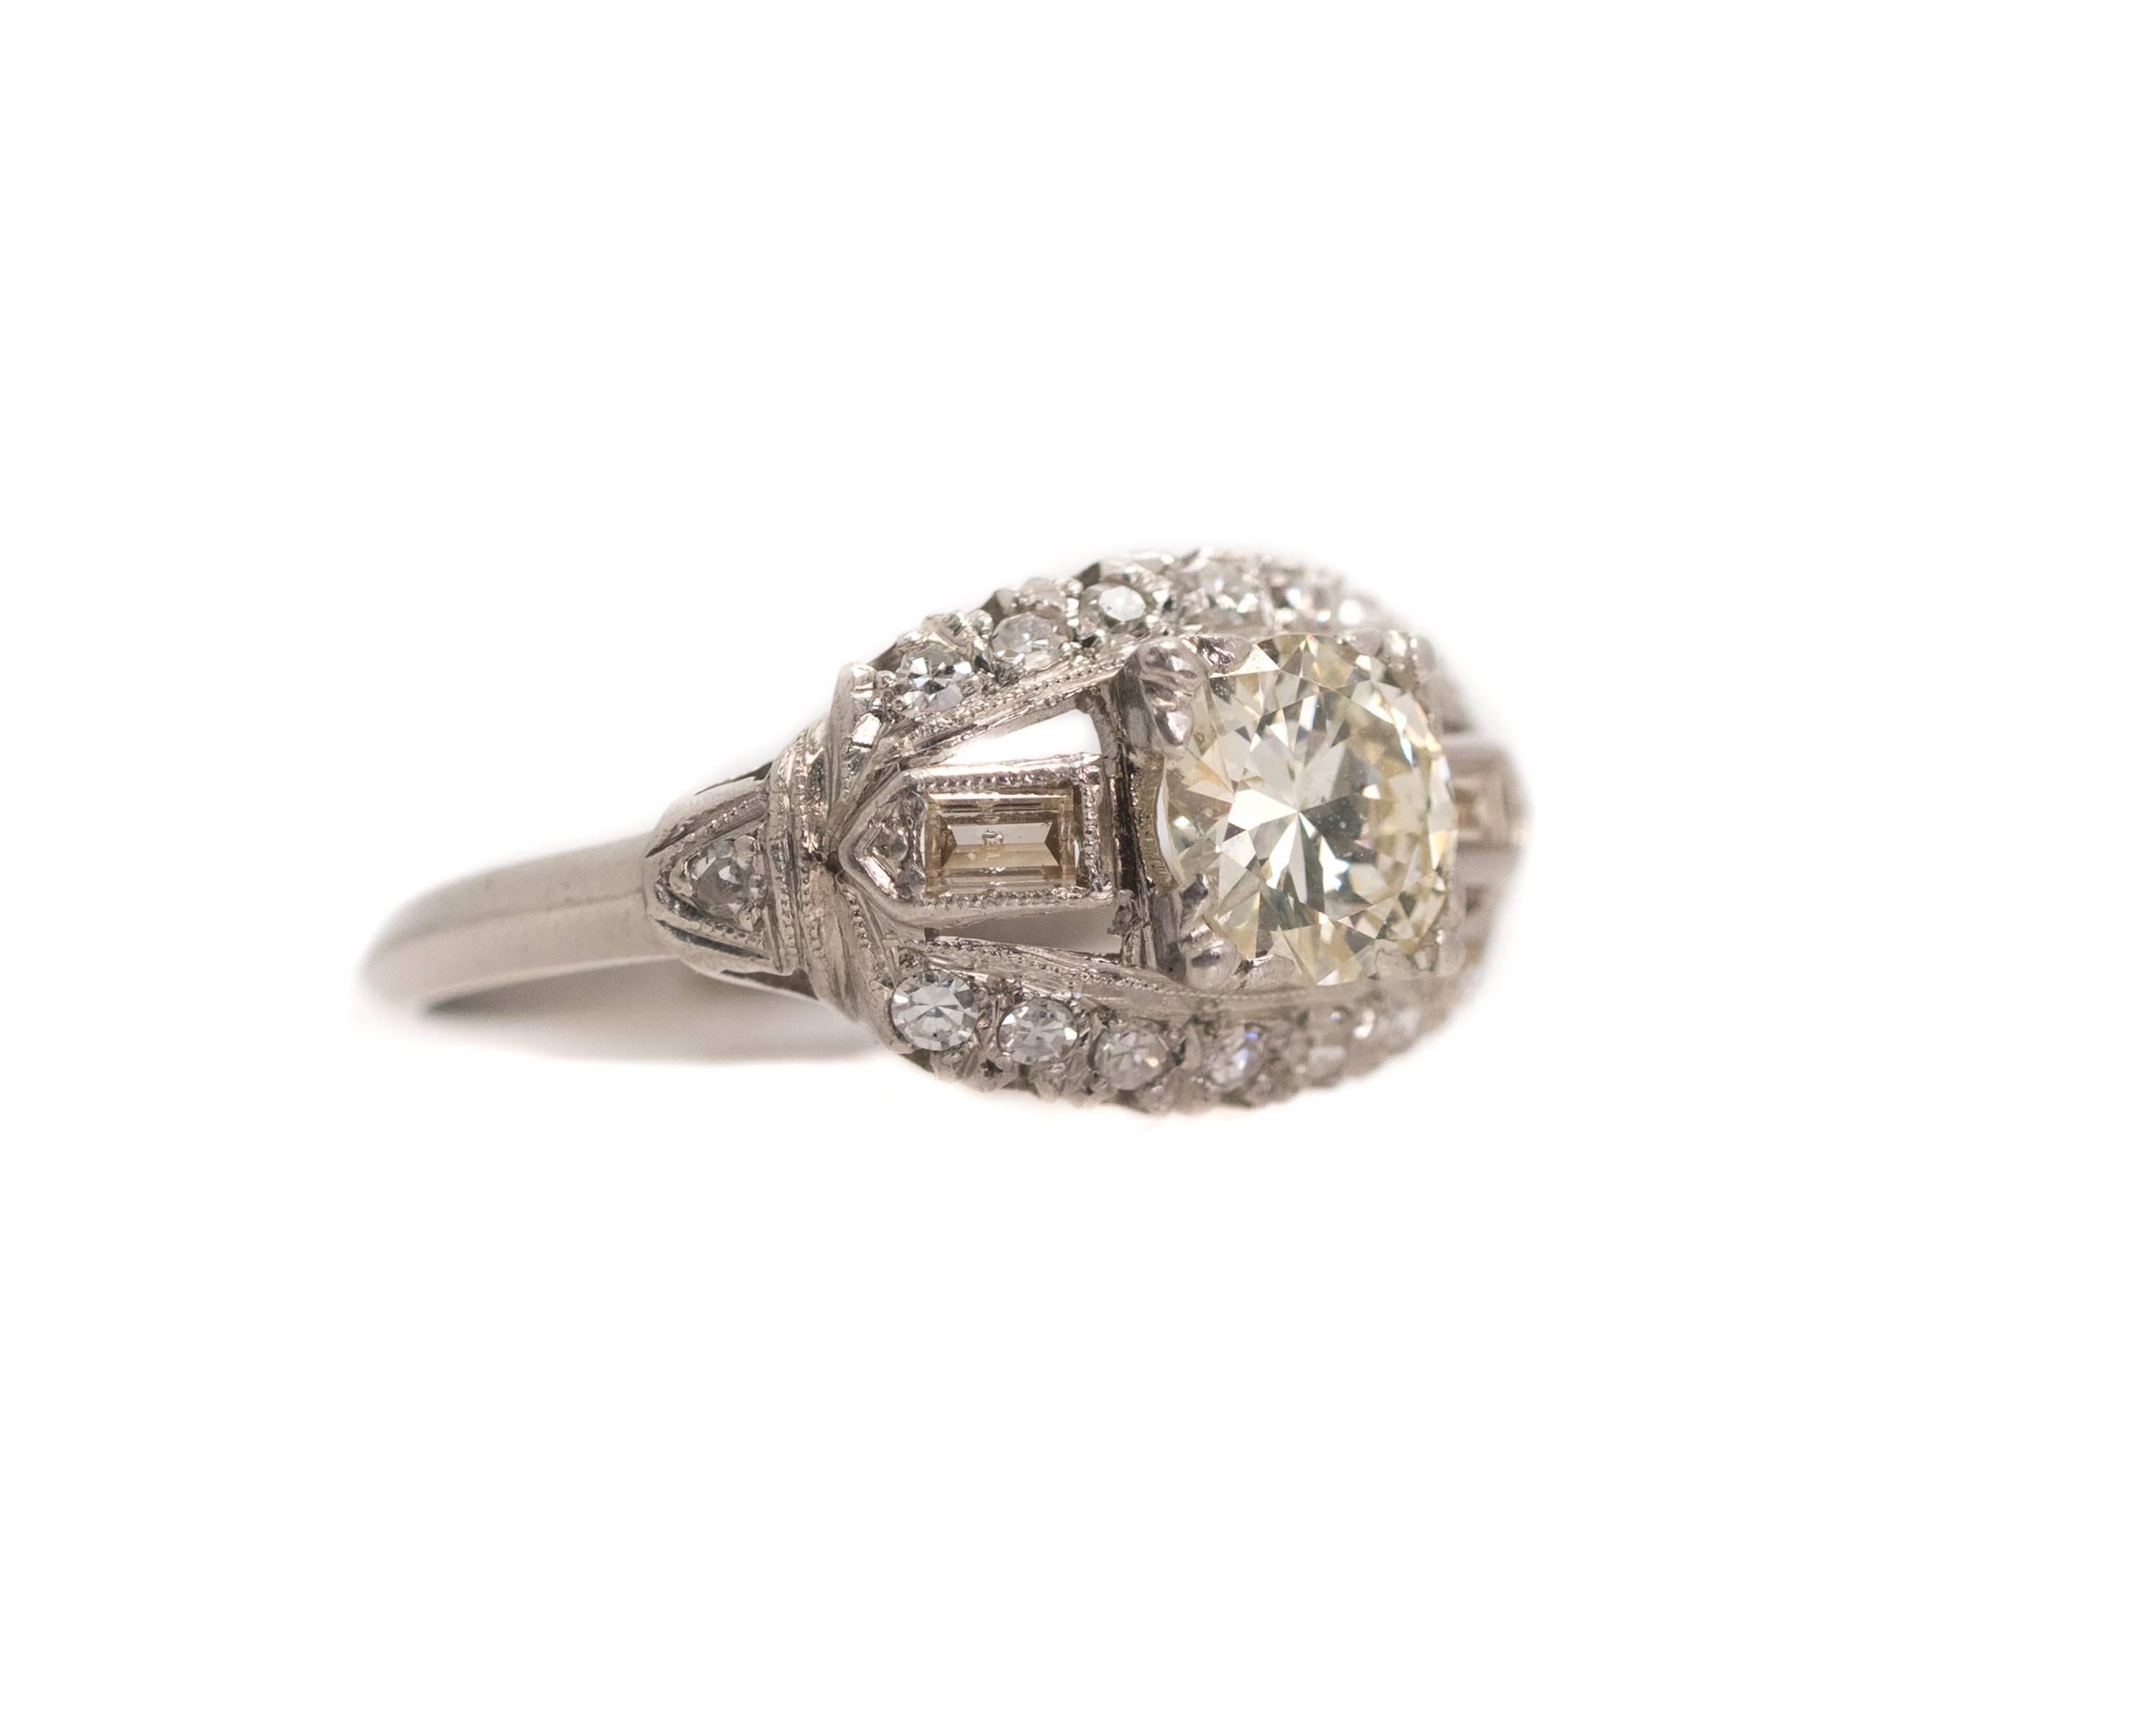 1.0 Carat Total Weight Diamond Engagement Ring - Platinum, Diamonds

Features a 0.80 Old European Diamond Center Stone. The round center stone is flanked by Baguette Diamonds. Round Brilliant Diamonds are set along the upper and lower edges of the